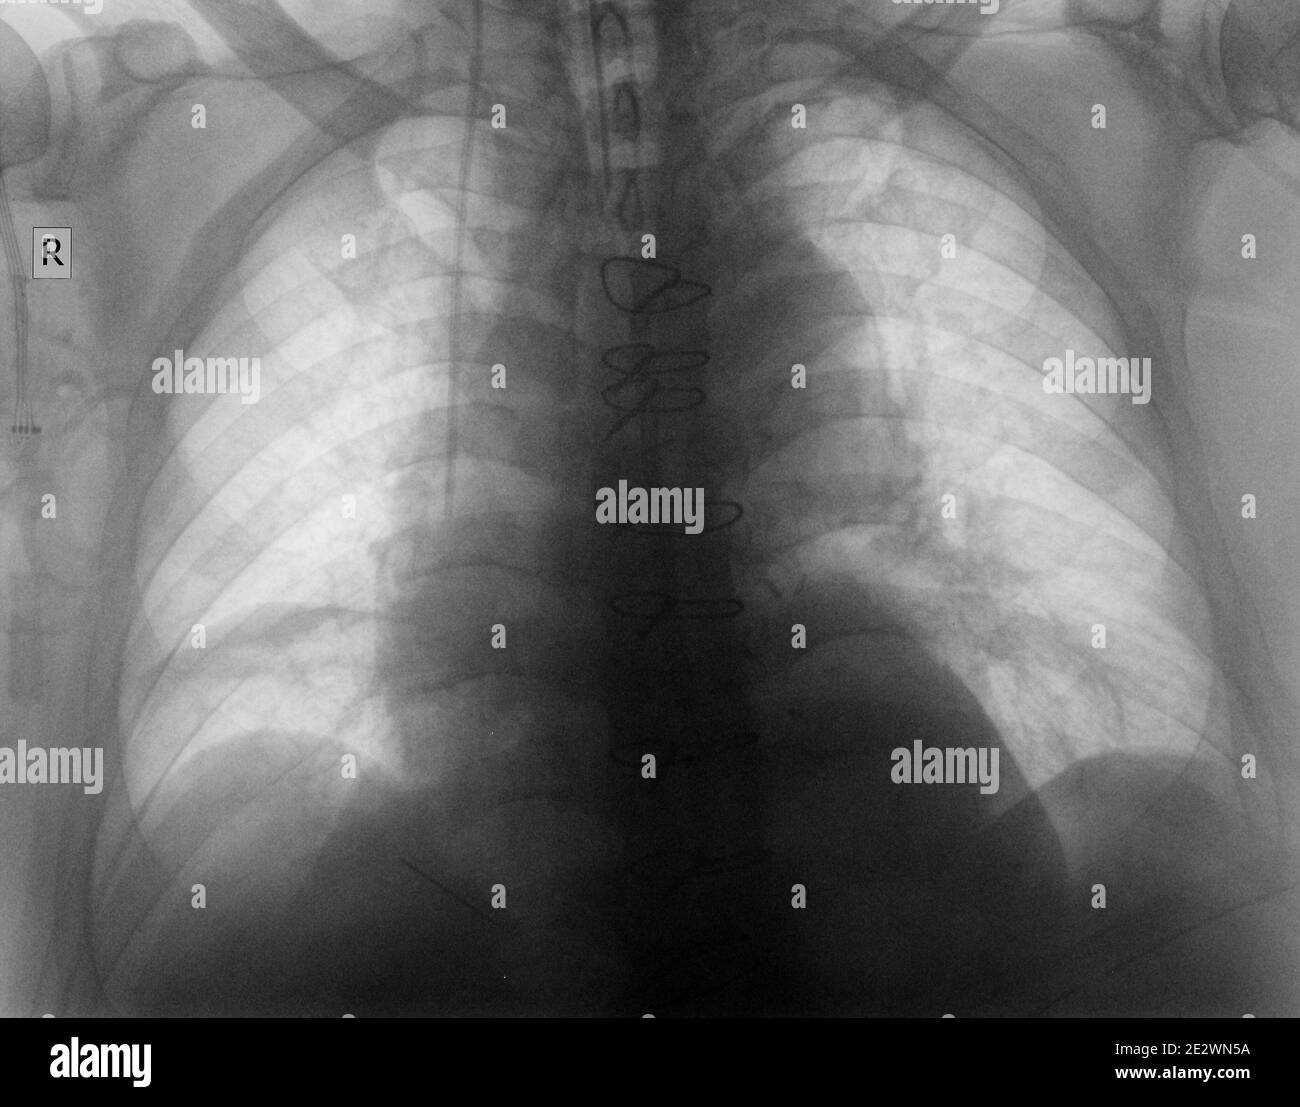 Plain chest radiagraph of patient after cardiac surgery. Stock Photo